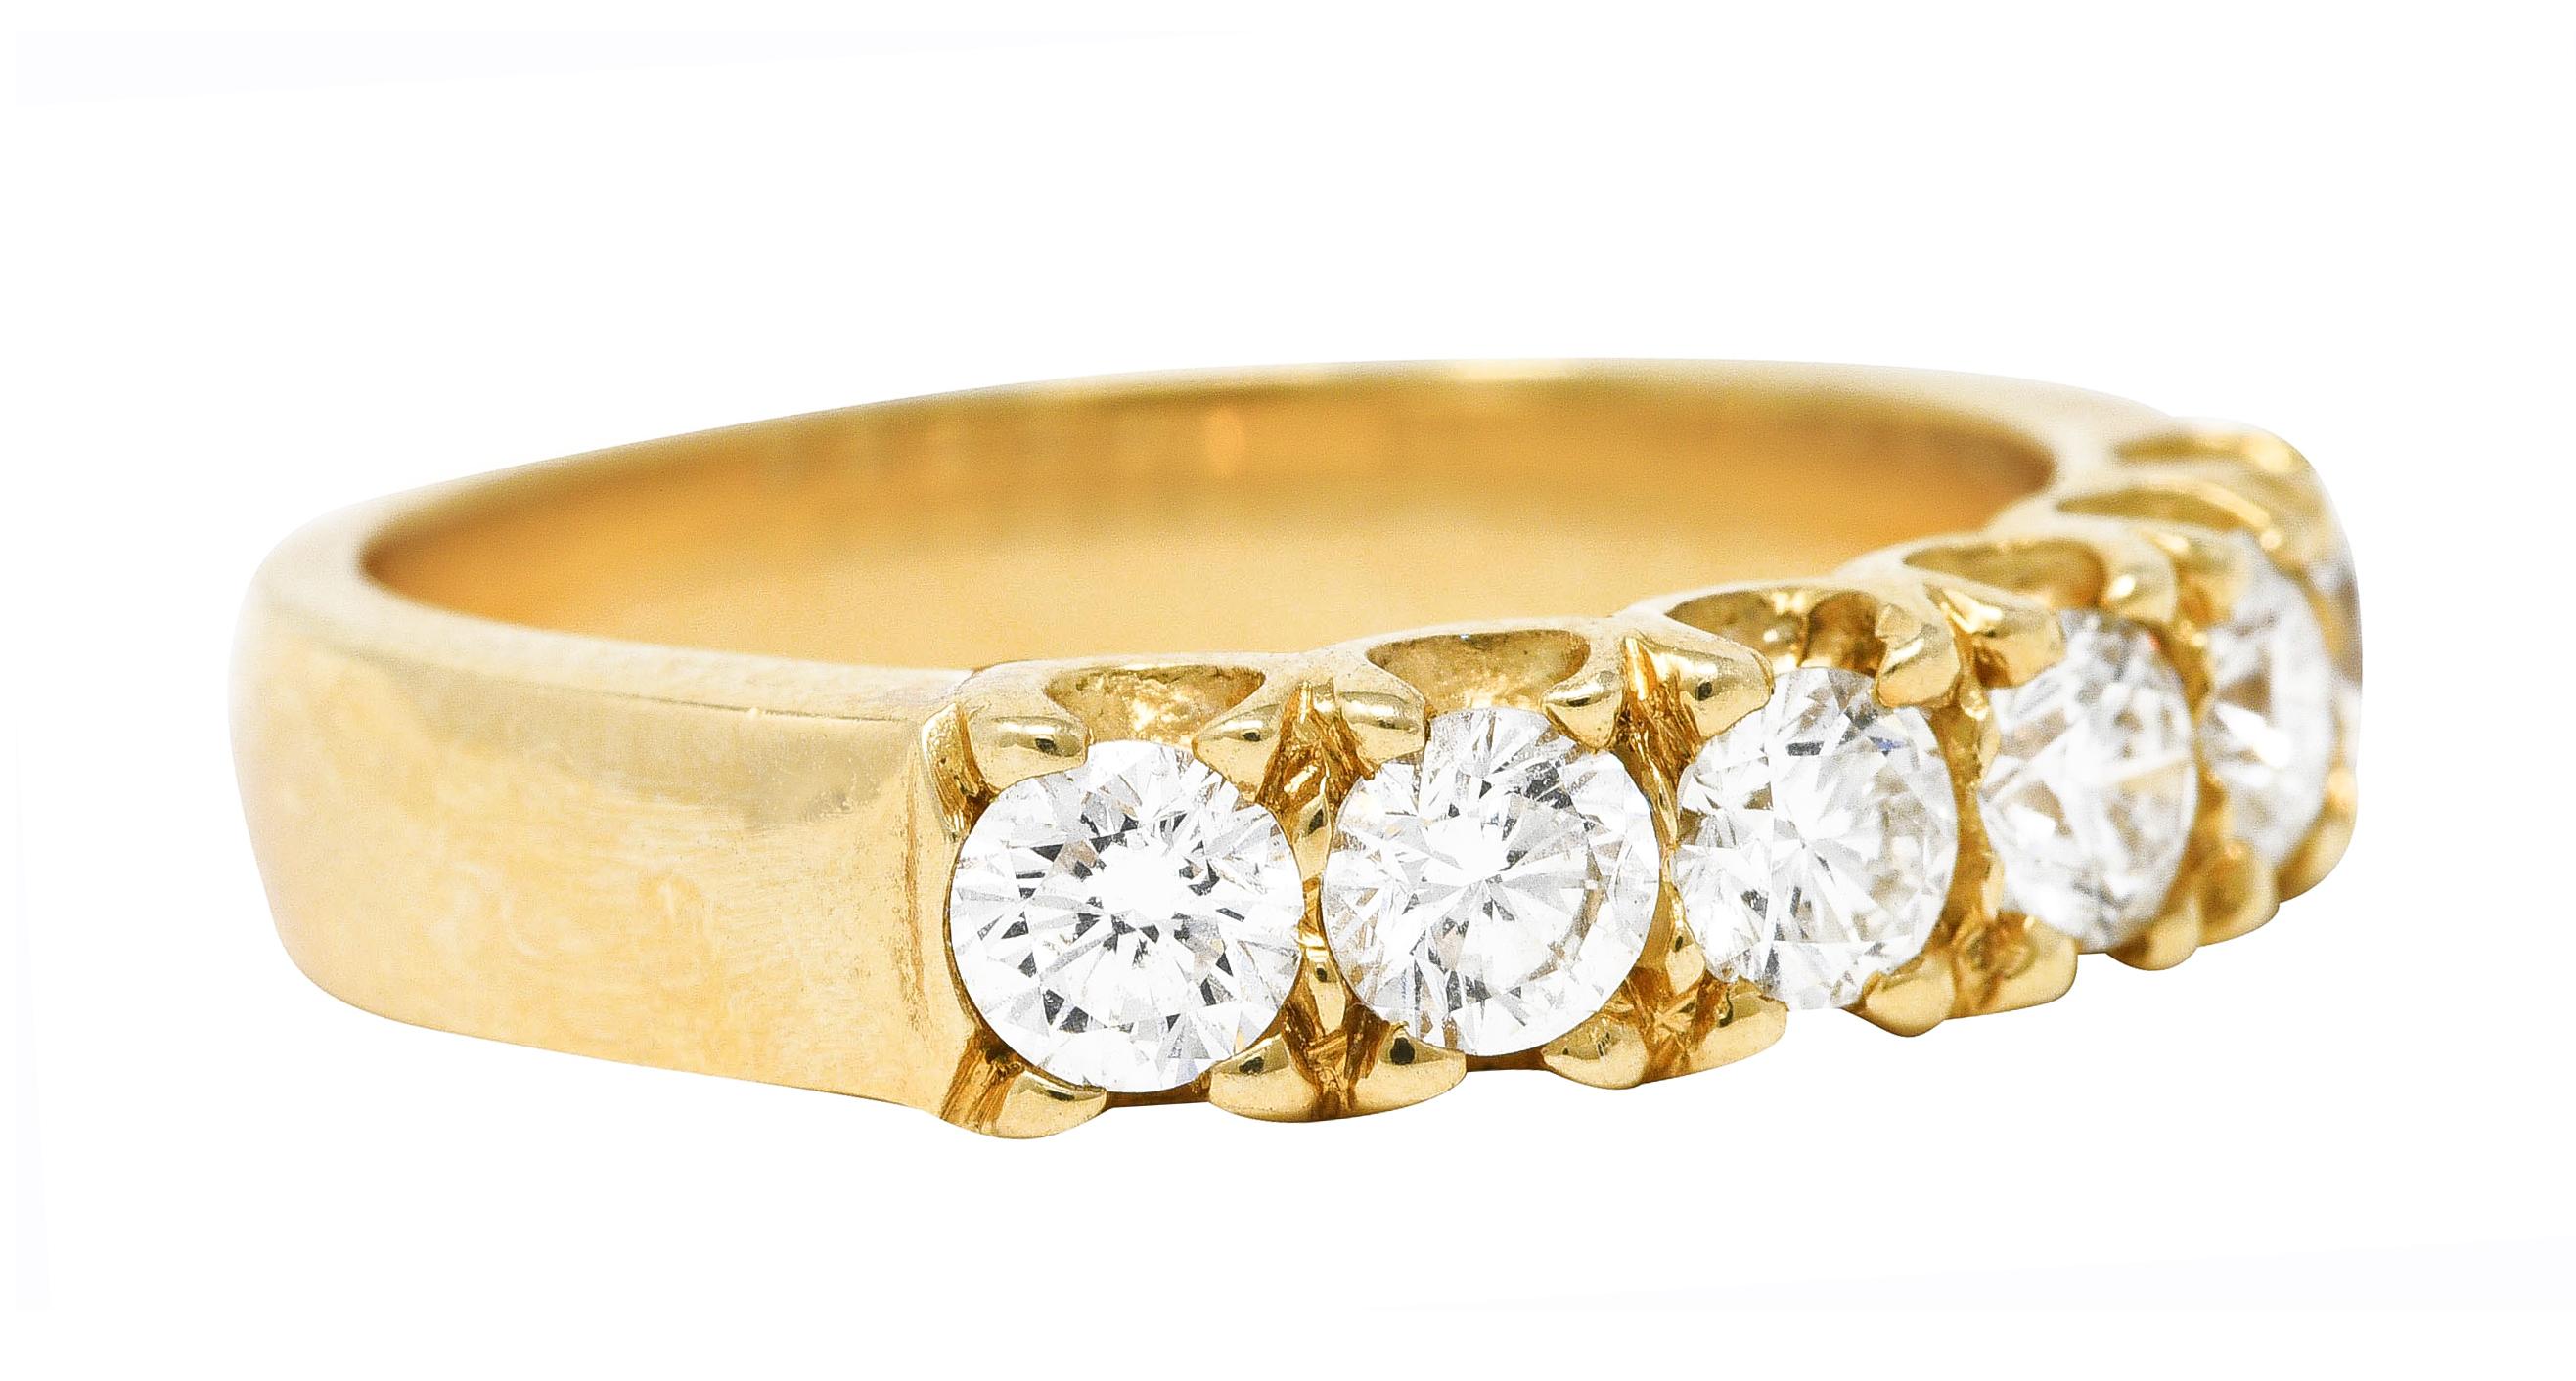 Band ring features six round brilliant cut diamonds prong set to front

Weighing approximately 0.90 carat - F in color with VS clarity

Featuring a fishtail profile

Stamped 14k for 14 karat gold

With maker's mark for Leo Ingwer

Circa: